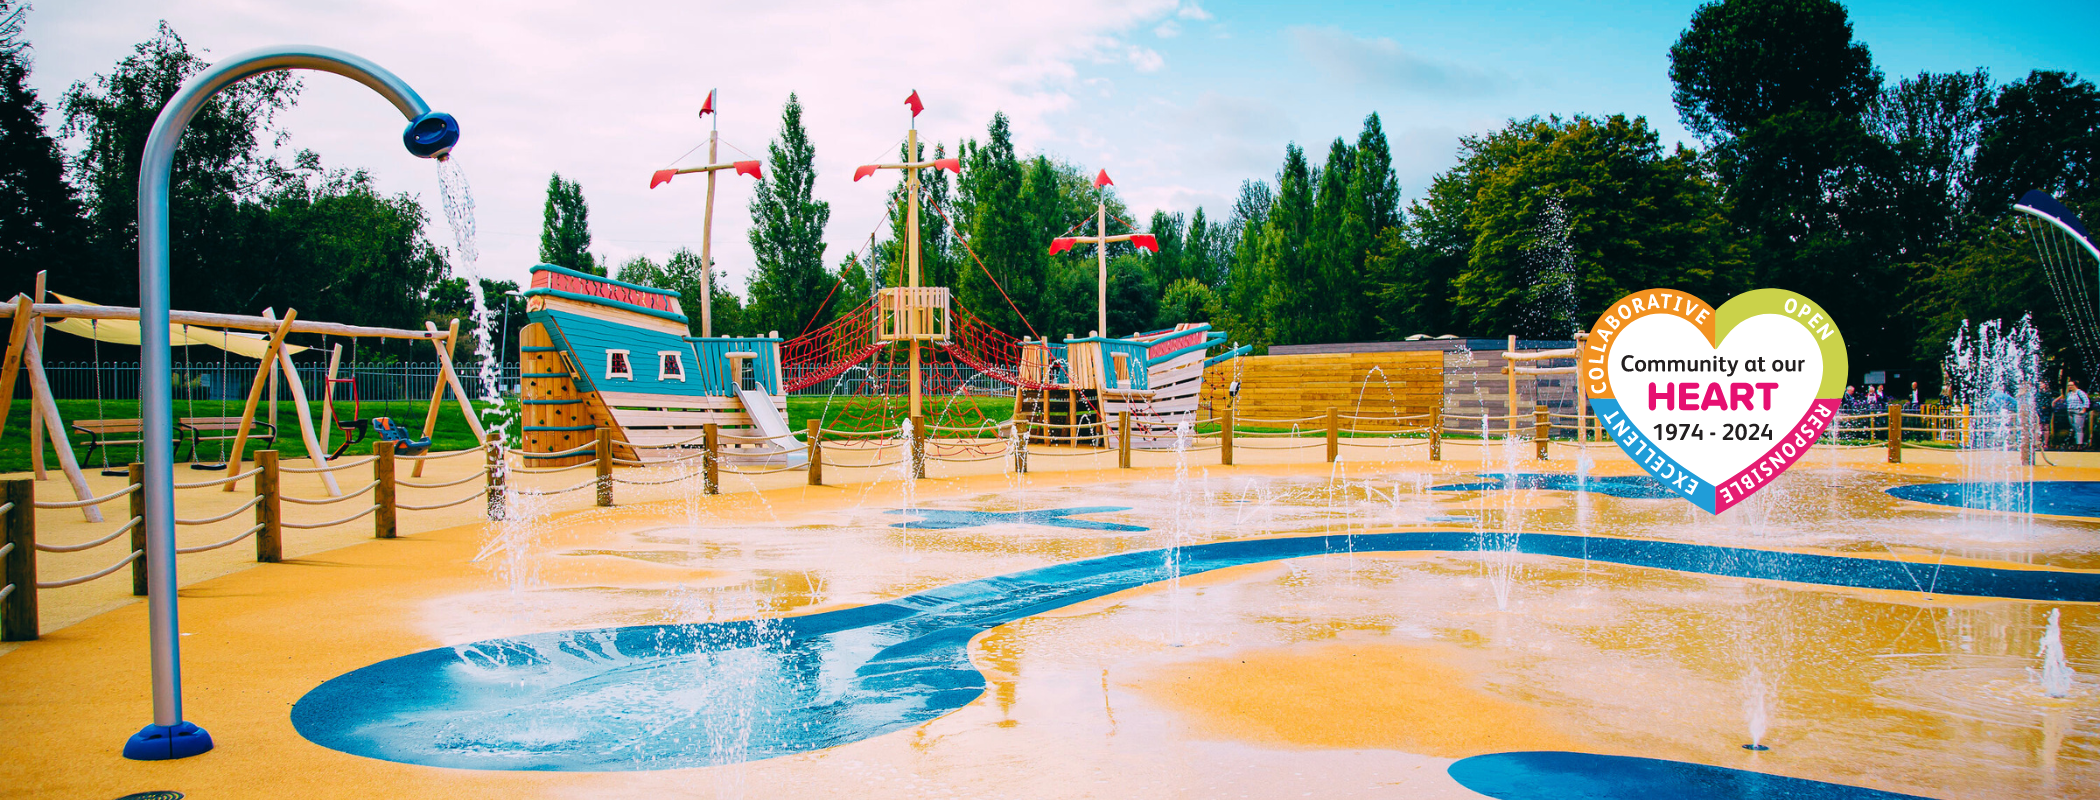 splashpark with sprinklers and play equipment including a pirate ship and the community at our heart logo